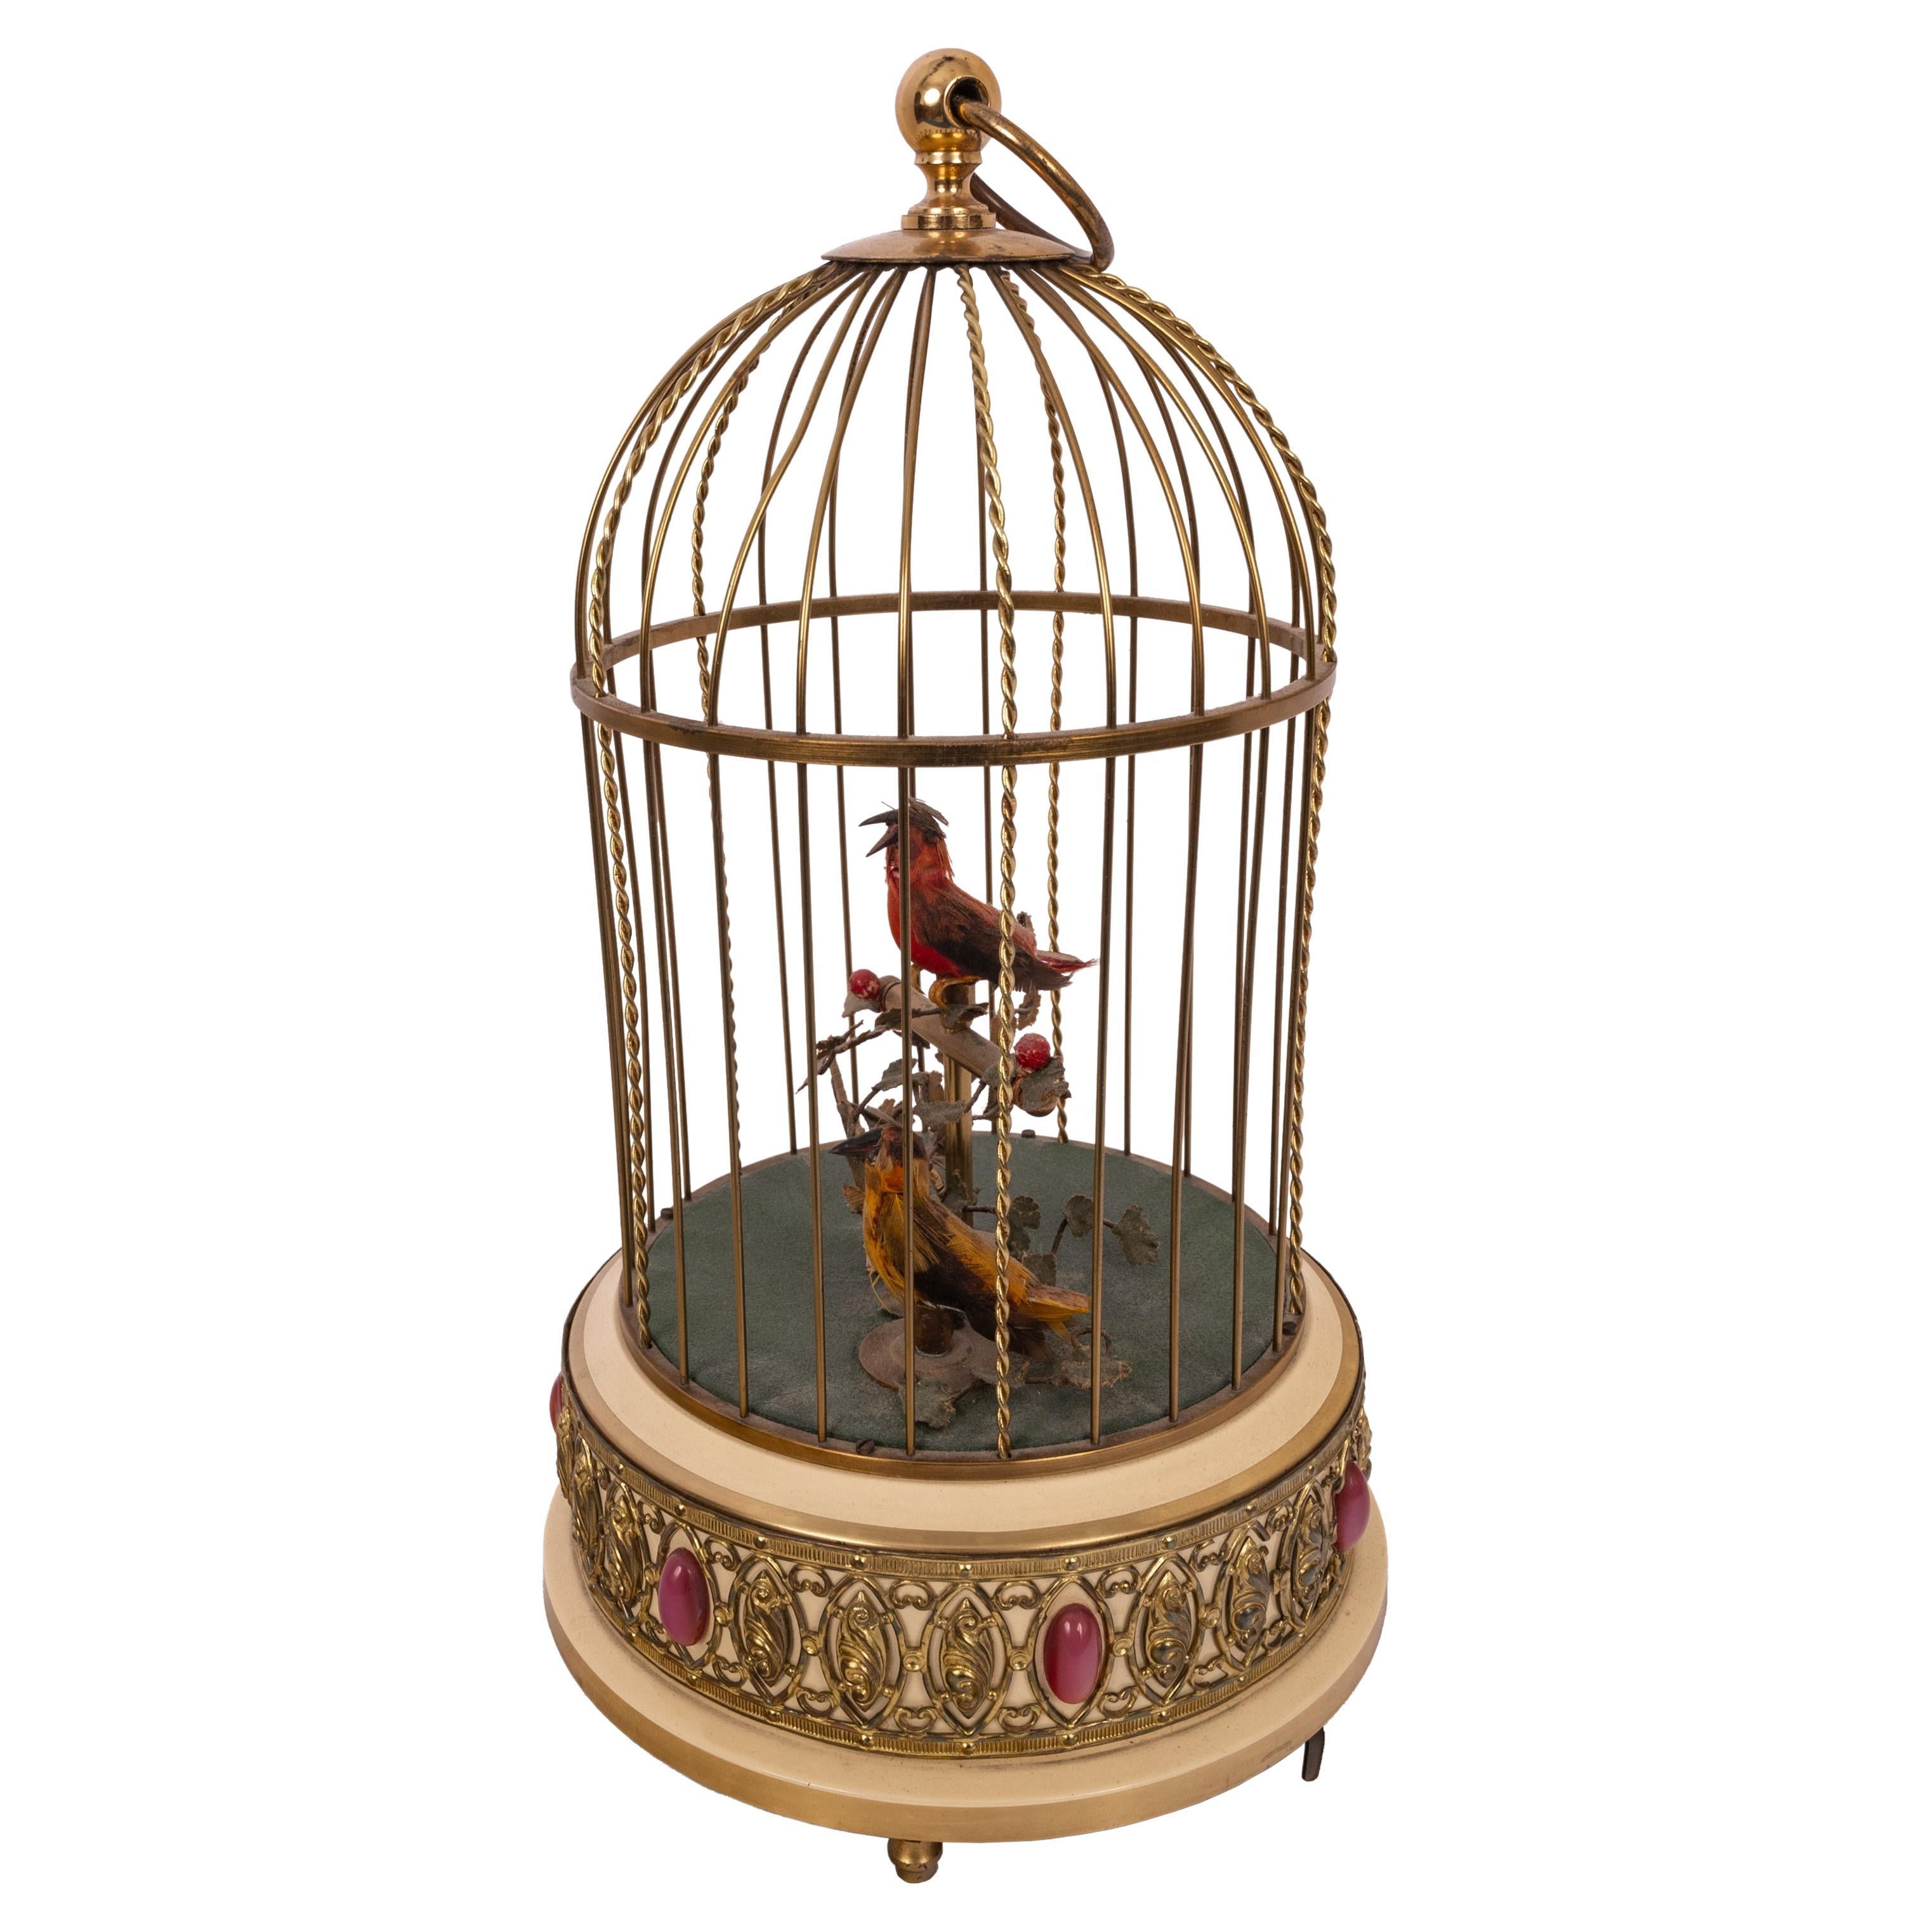 A good antique twin singing birds in a cage automoton, Karl Griesbaum, circa 1950
A pair of feathered birds sing various bird song calls while moving their tails and beaks and bodies and swiveling their heads inside a brass cage. Dating from around